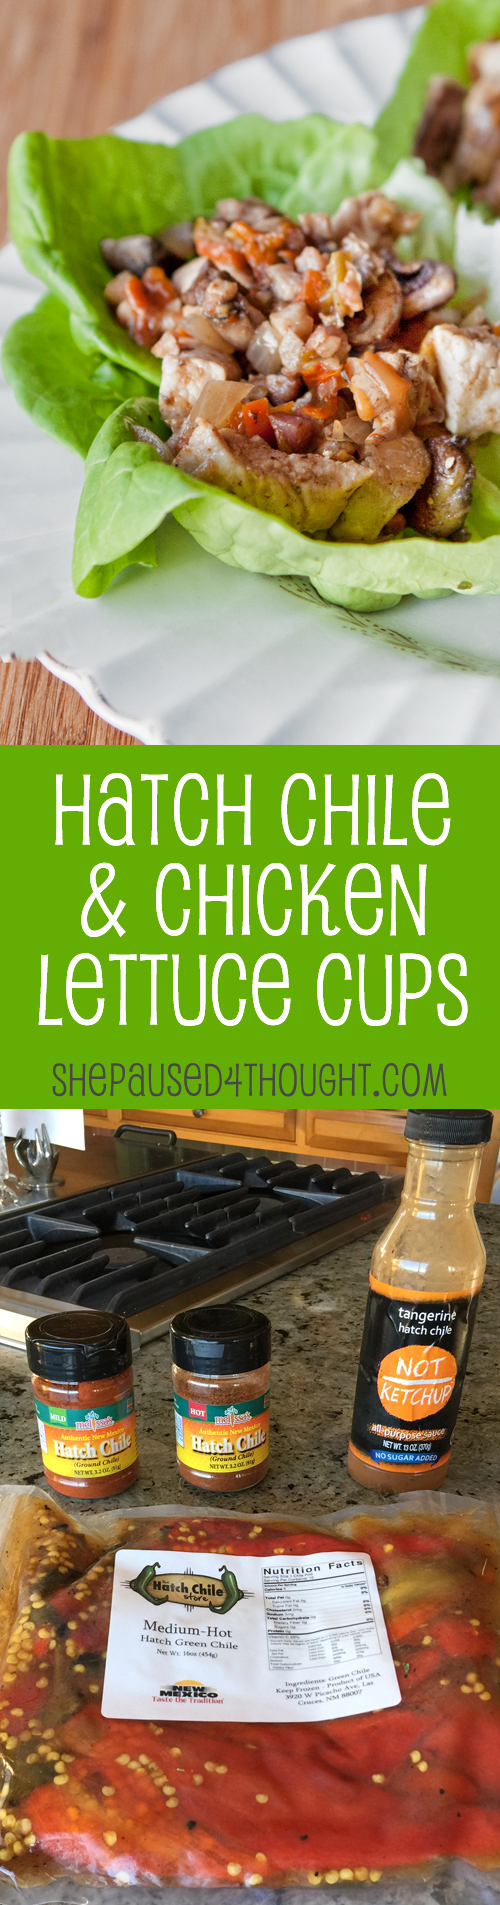 Hatch Chile & Chicken Lettuce Cups | She Paused 4 Thought